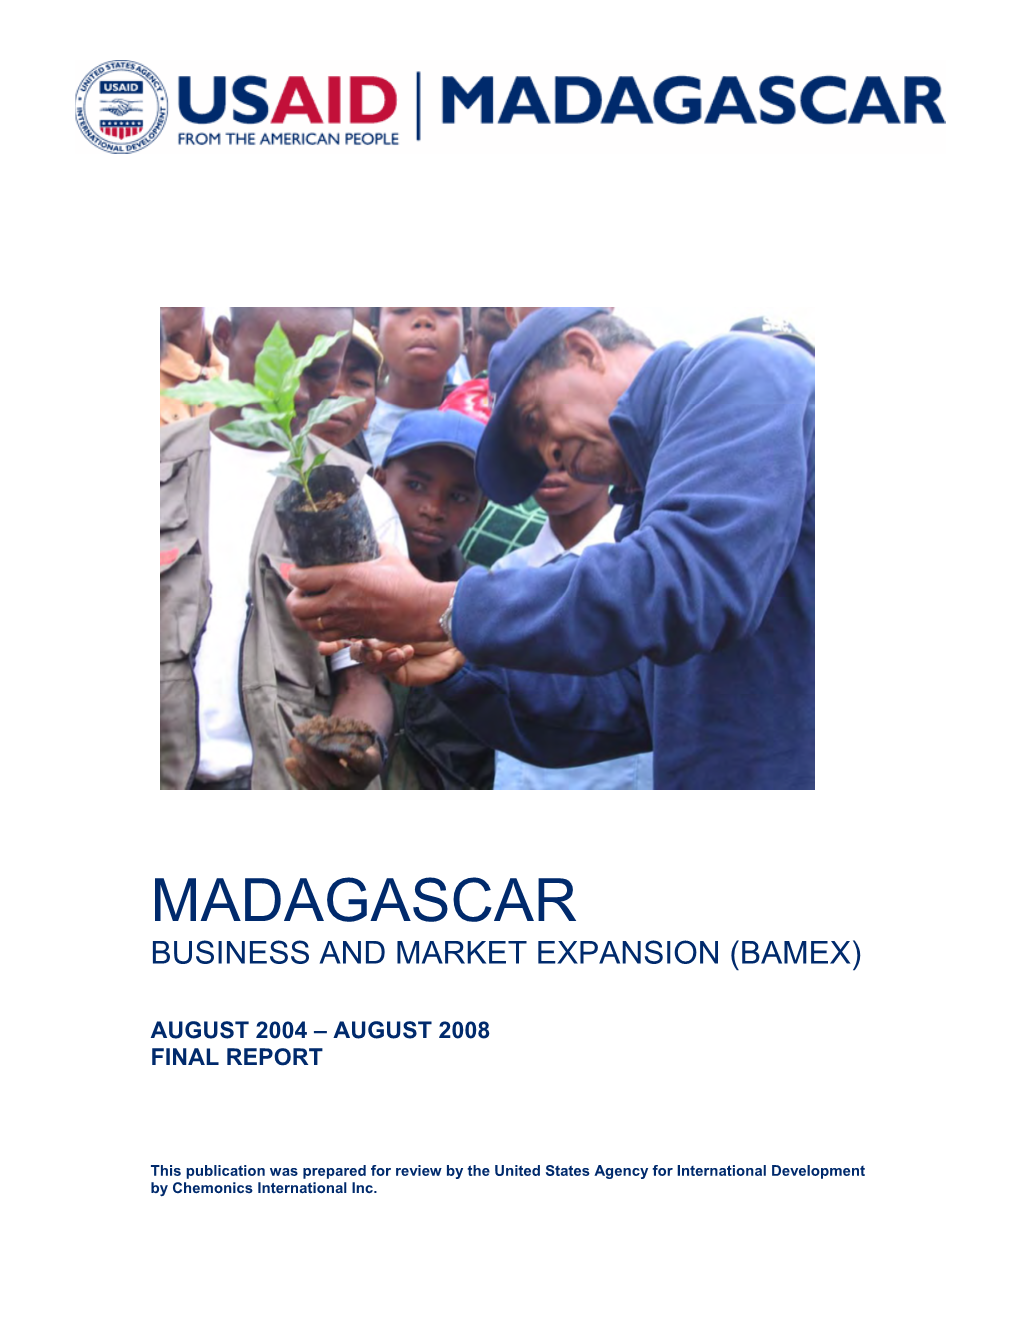 Madagascar Business and Market Expansion (Bamex)